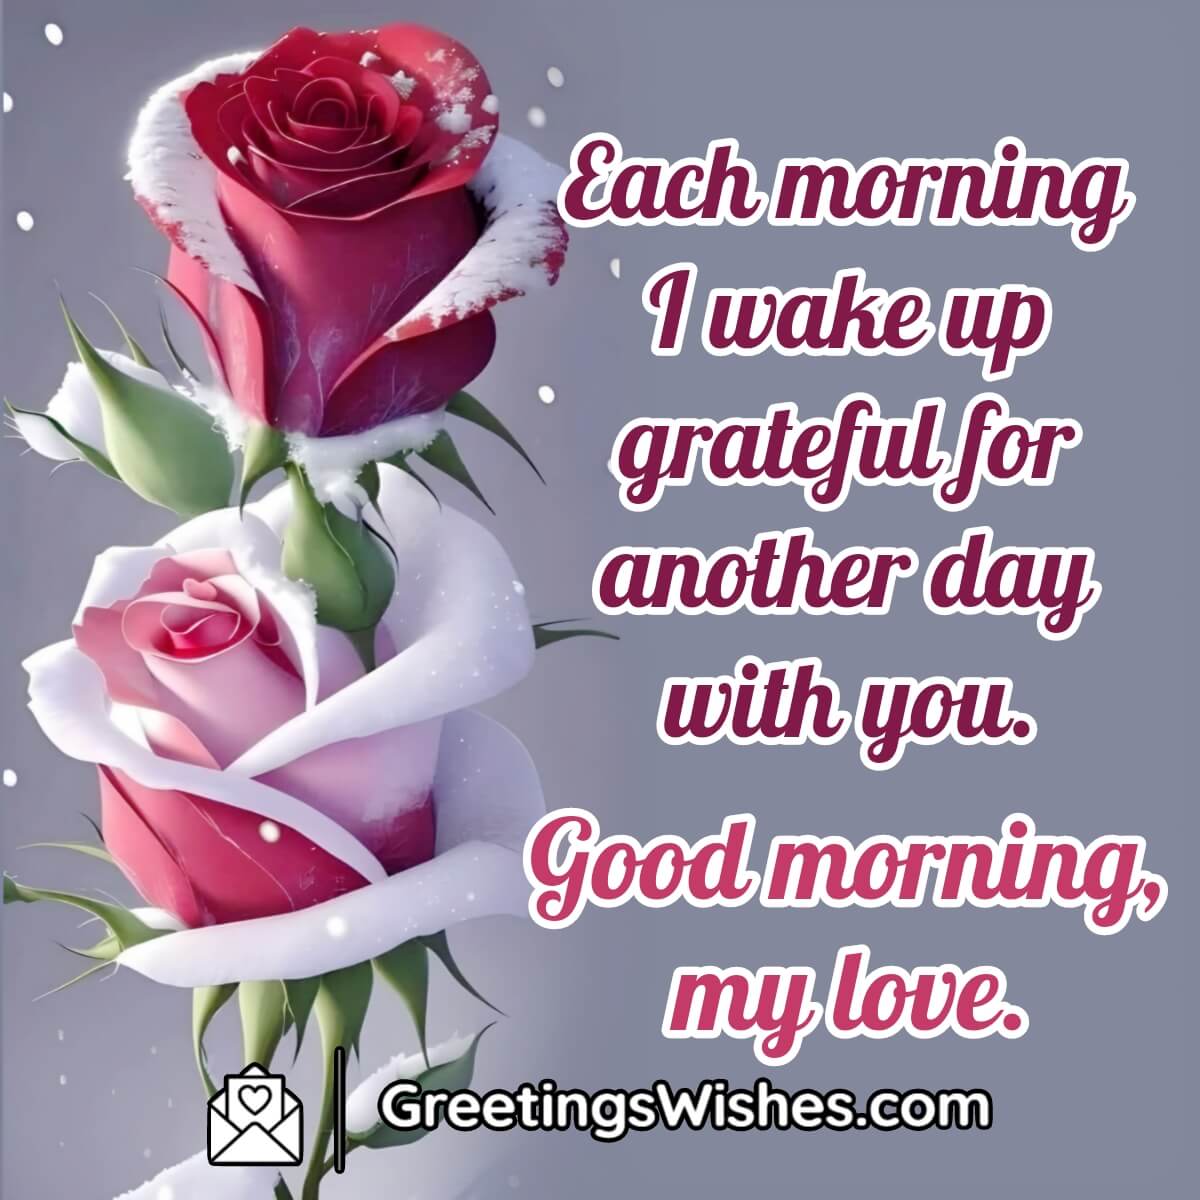 Good Morning Messages for Him - Greetings Wishes